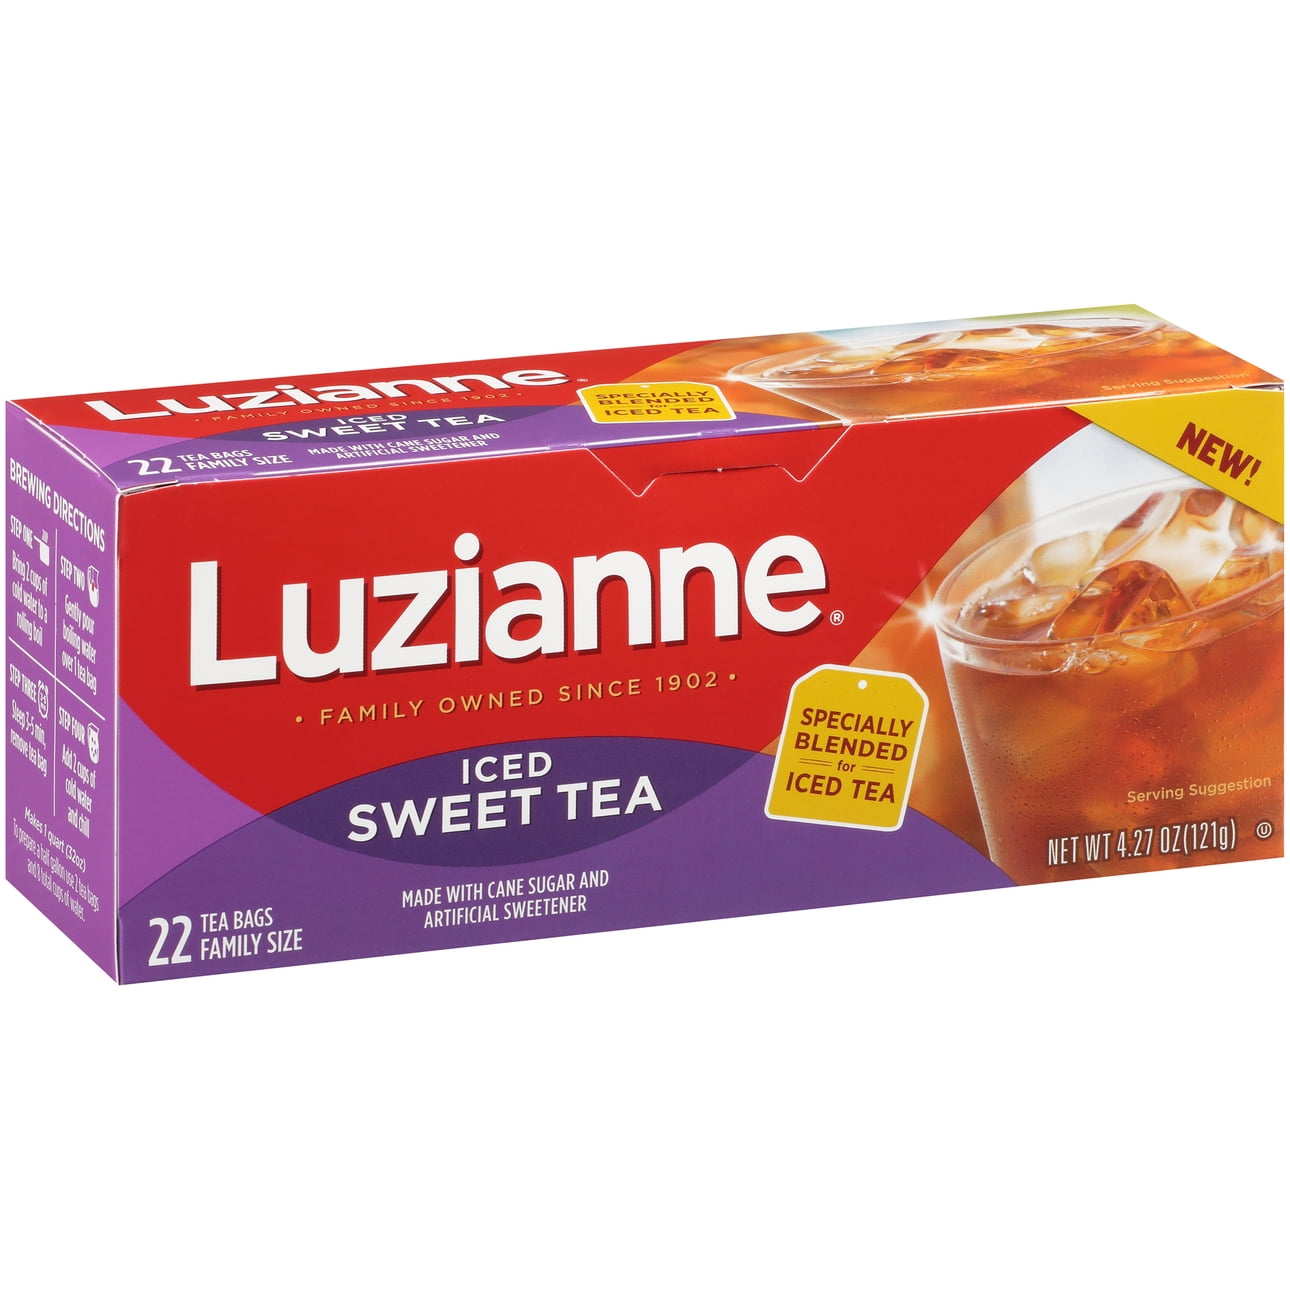 Luzianne Specially Blended Iced Tea Bags Pack of 6 Family Size 48-ct box 